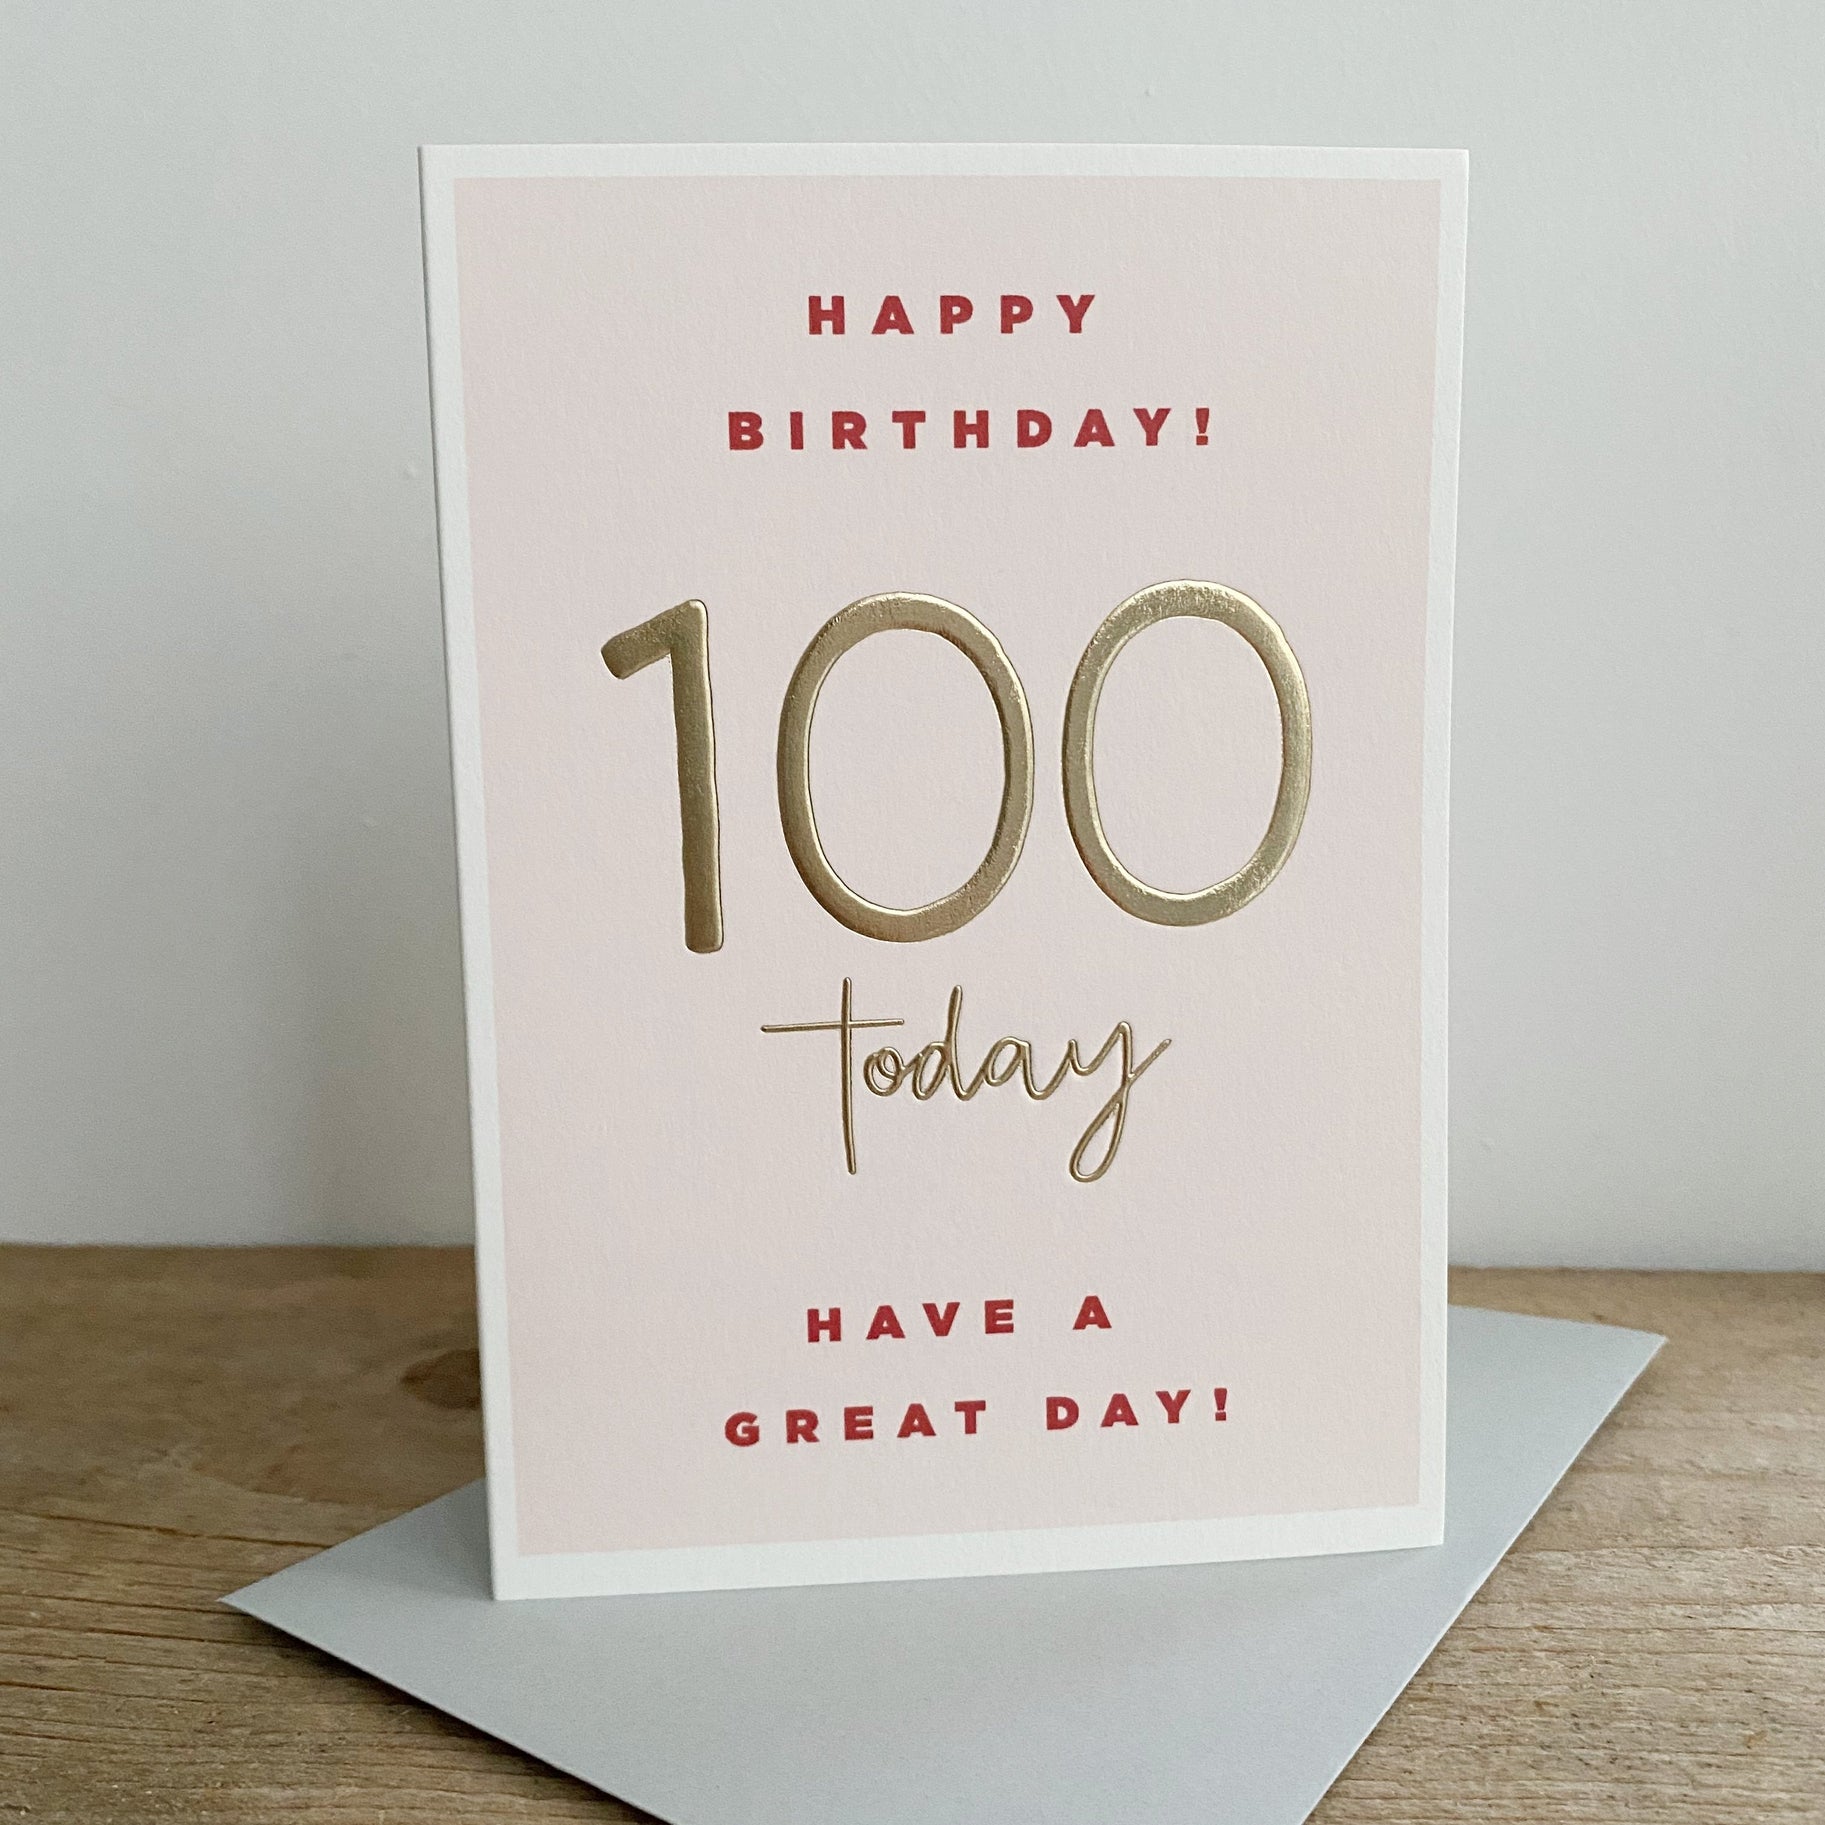 Happy Birthday 100 Today Have A Great Day! - Birthday Greeting Card - Mellow Monkey